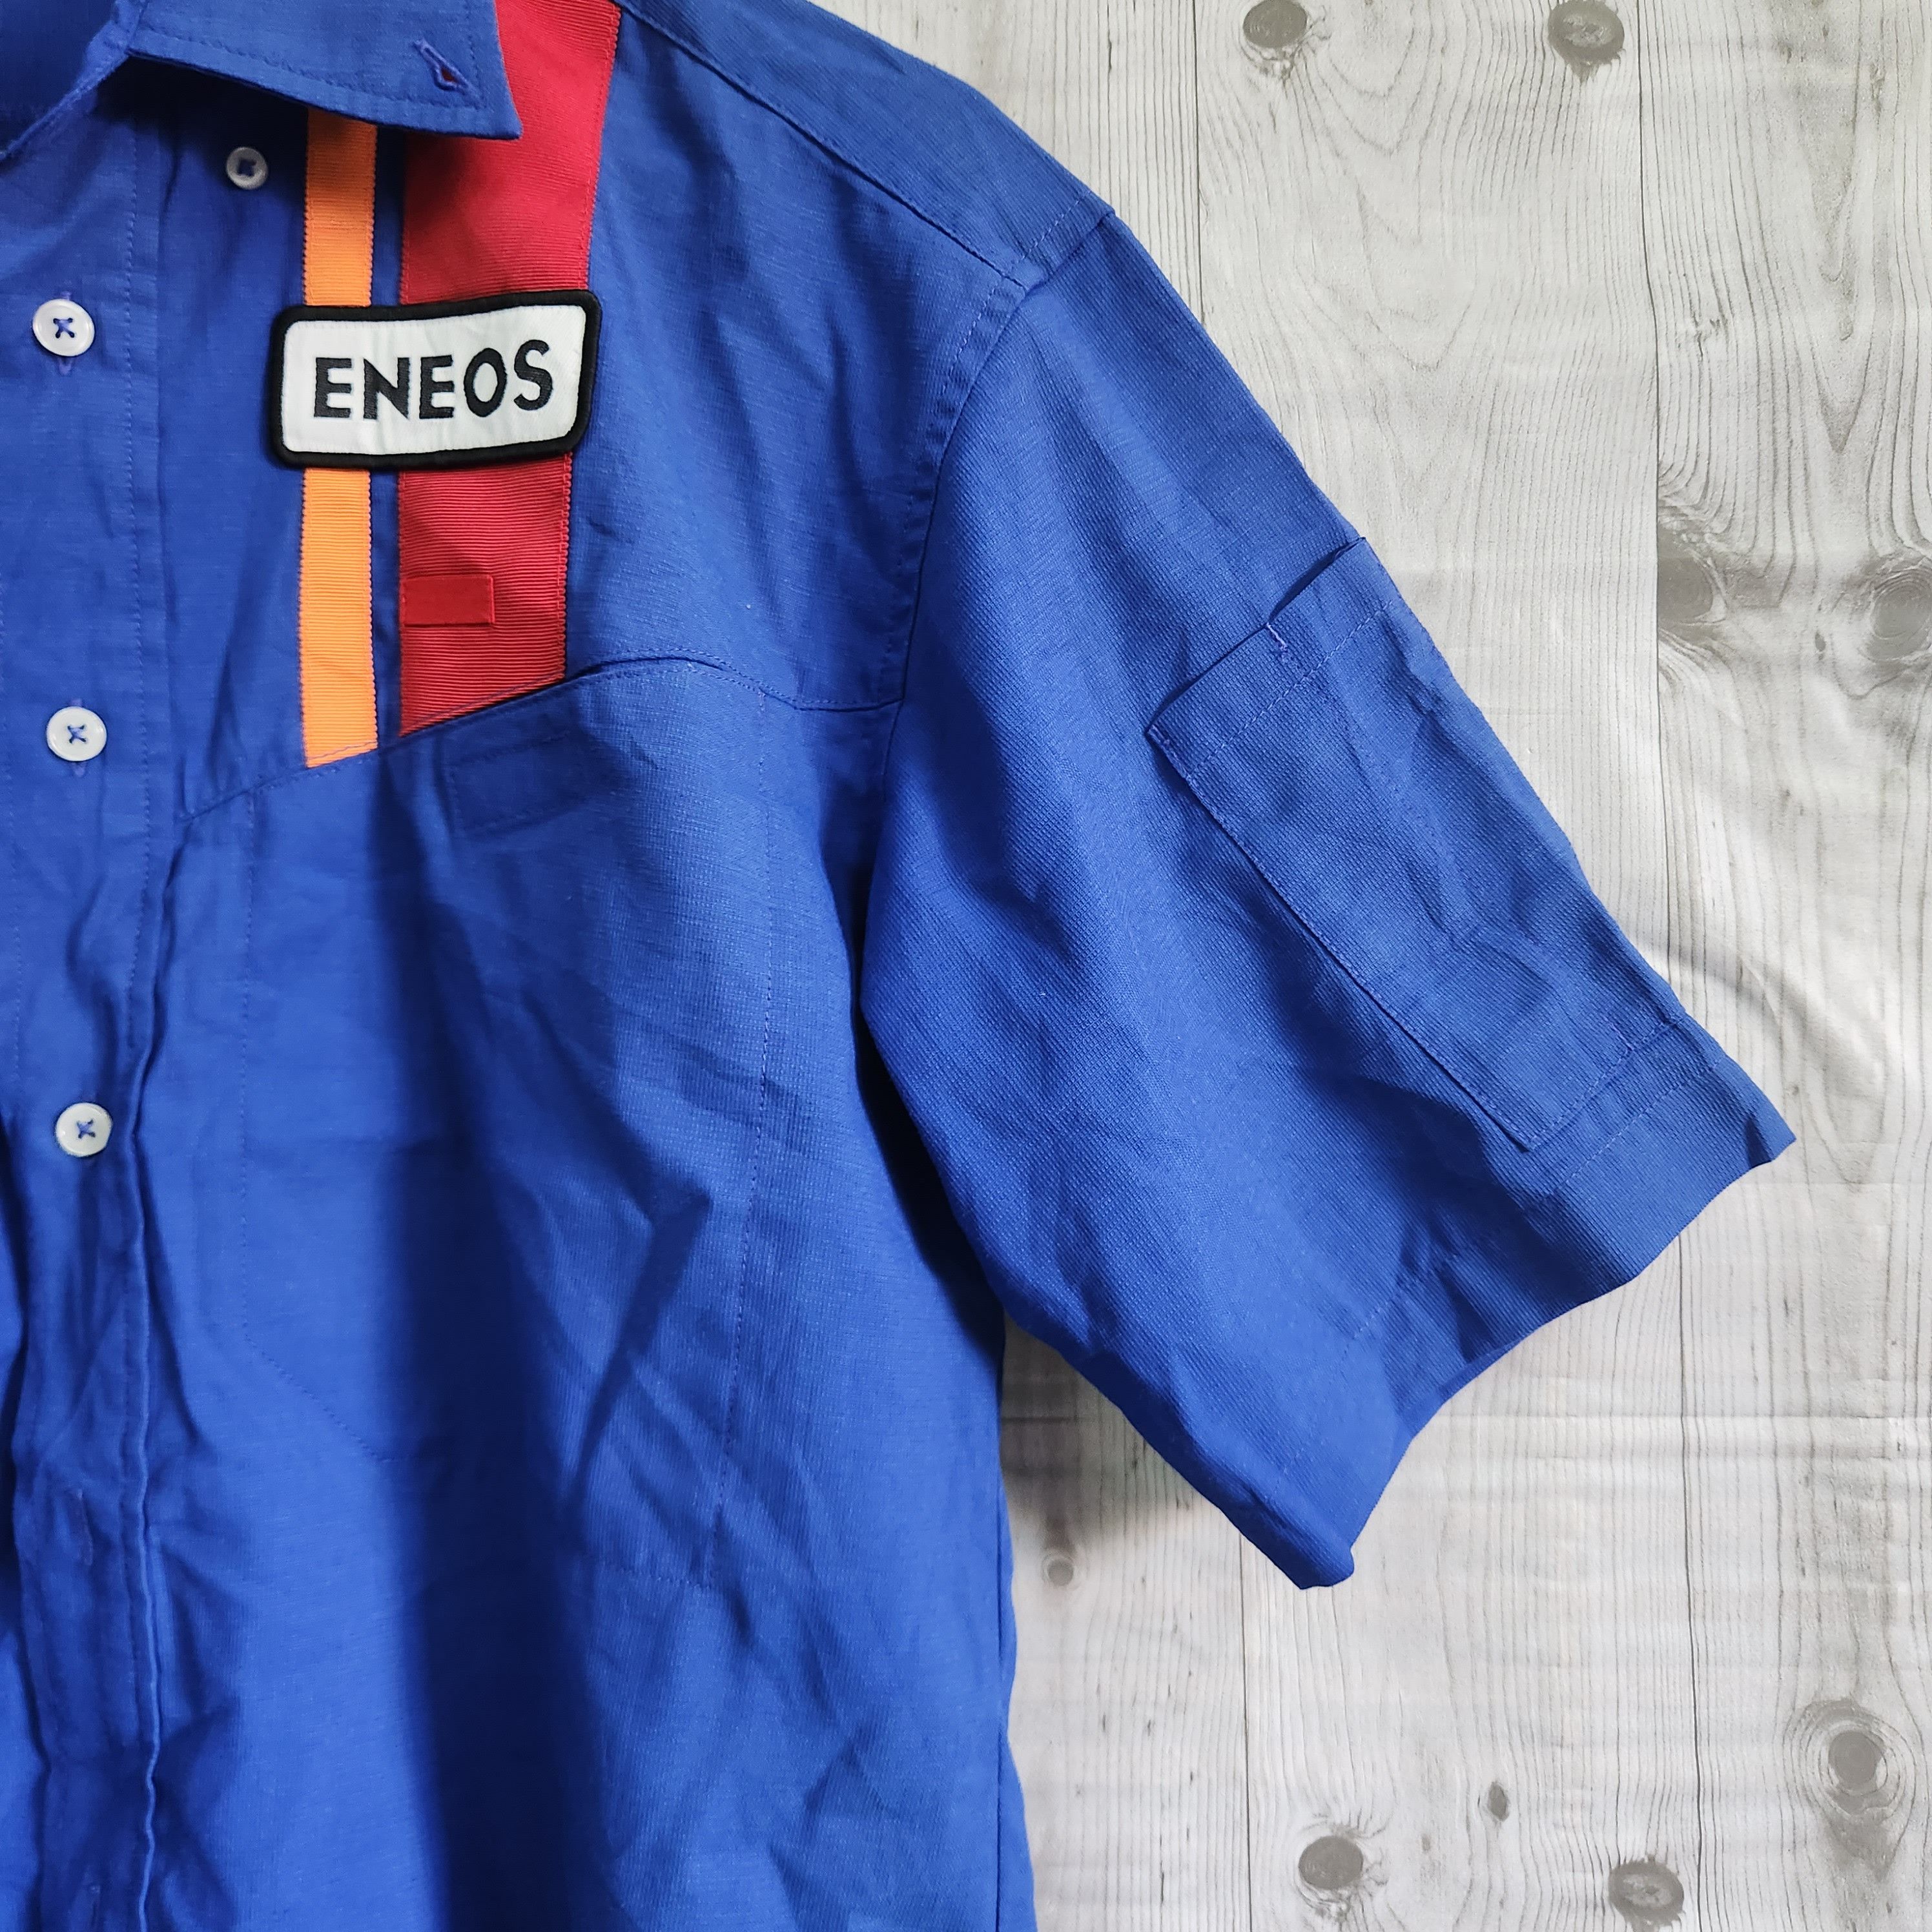 Vintage Japan ENEOS Workers Outlet Shirts - 13